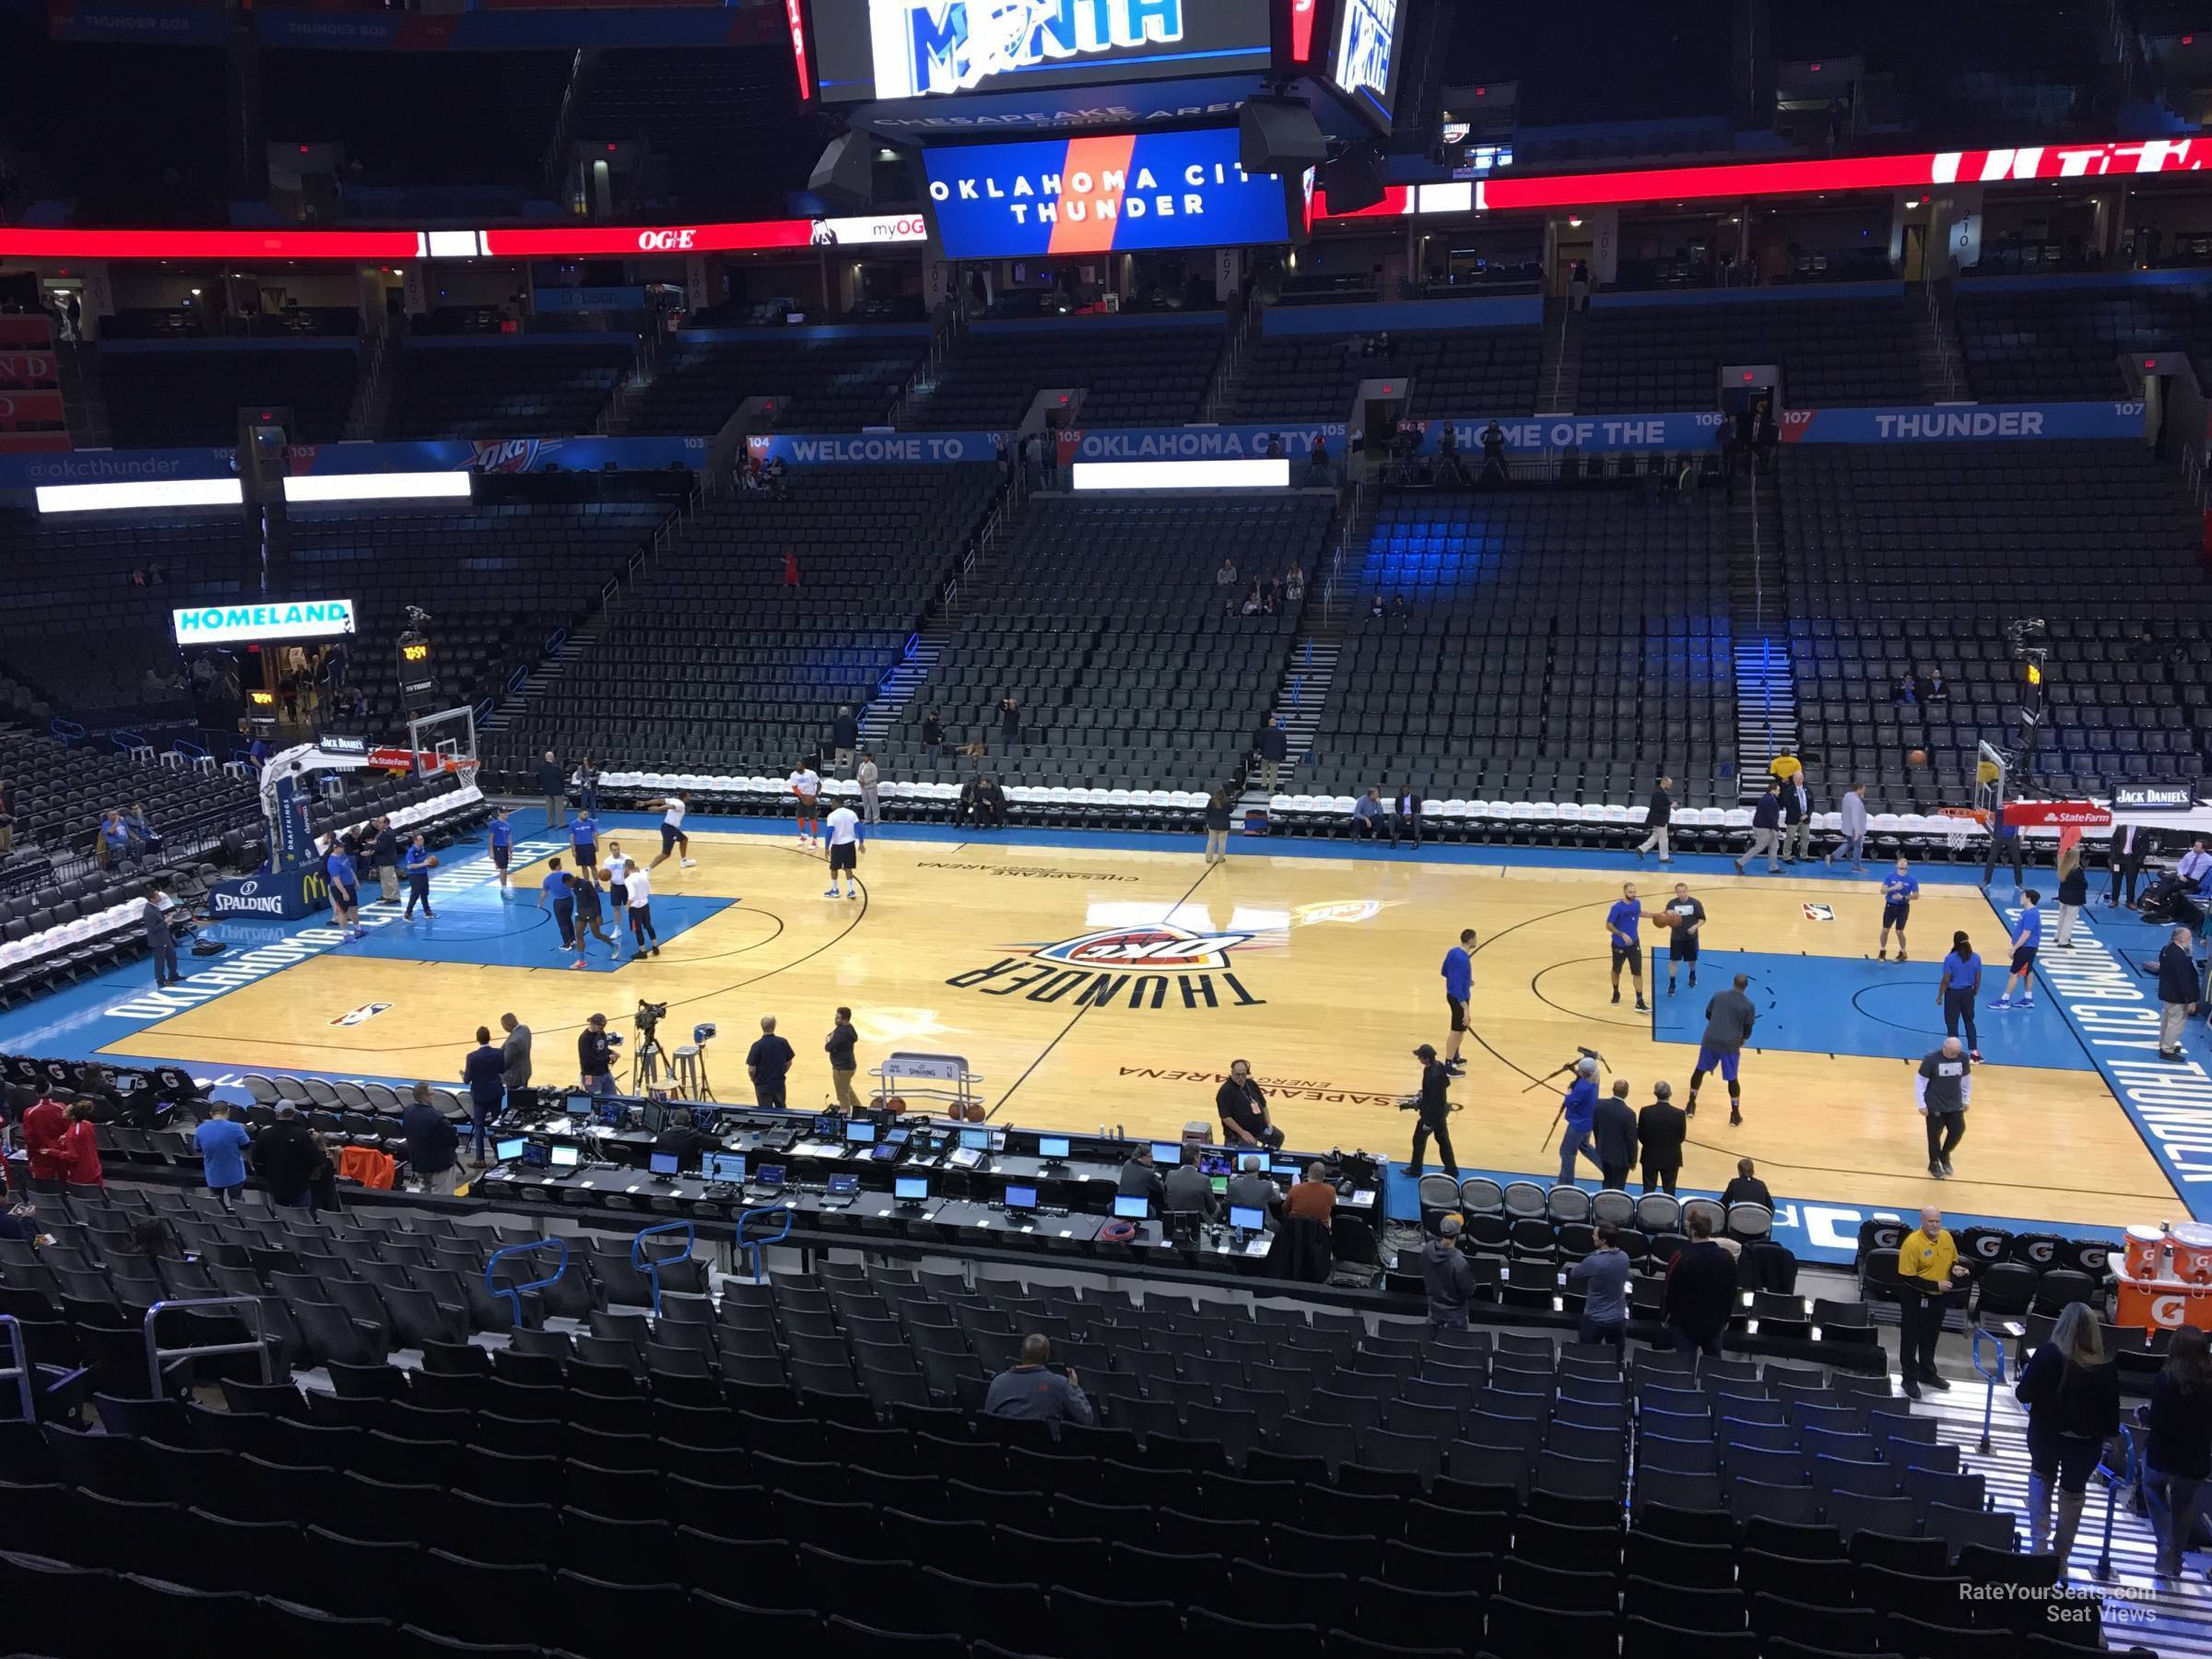 section 222, row a seat view  for basketball - paycom center